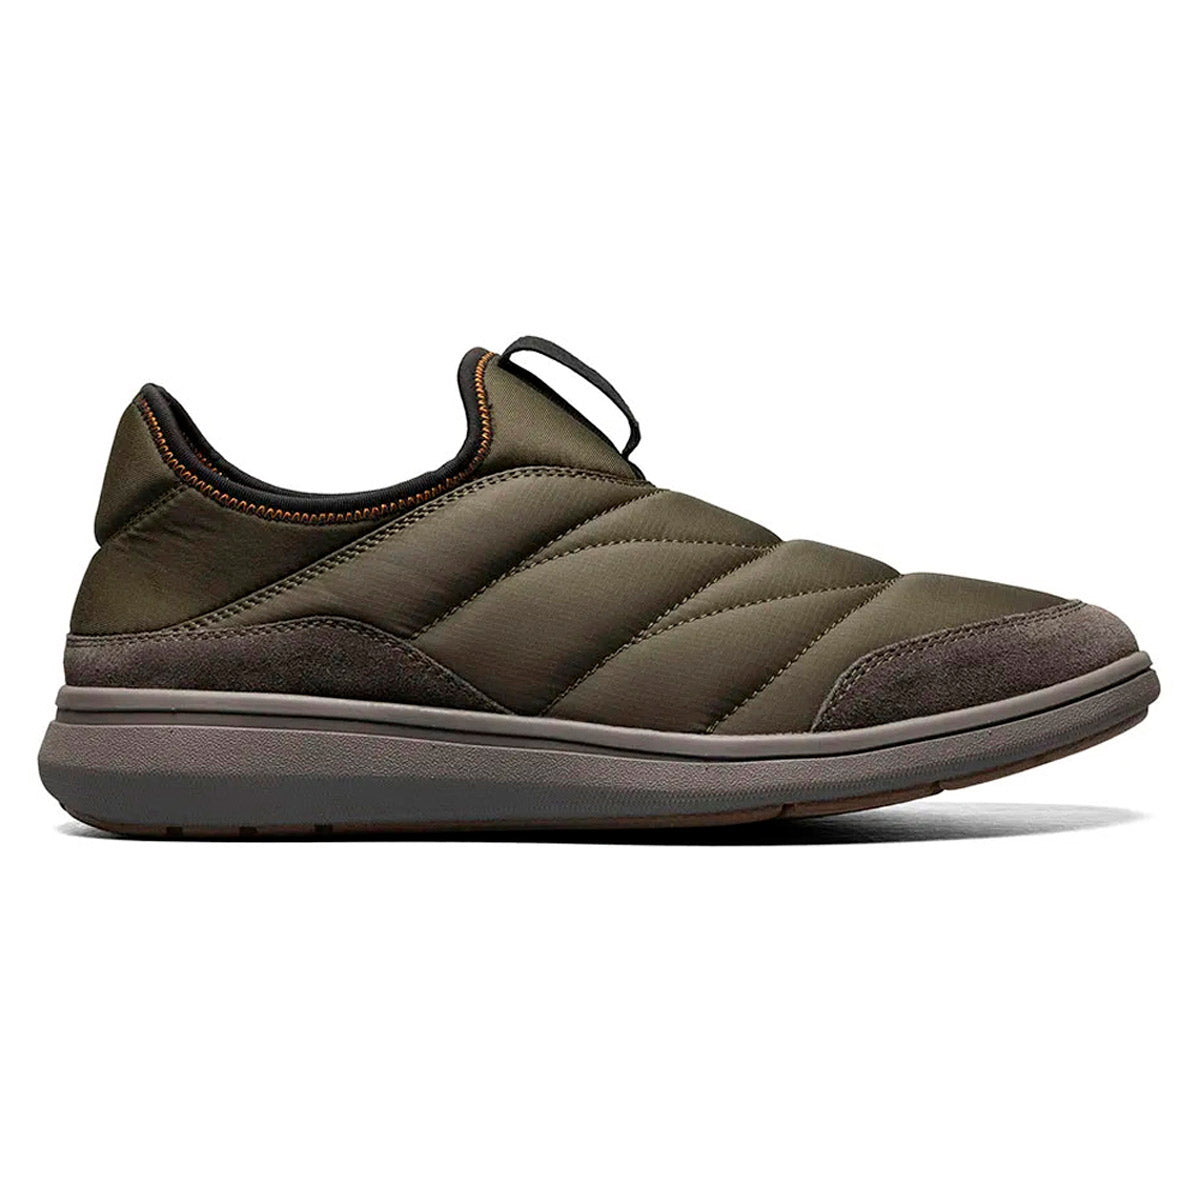 Men's olive green Florsheim FLORSHEIM JAVA MOC NYLON slip-on casual shoe with water-resisting quilted nylon stitching.